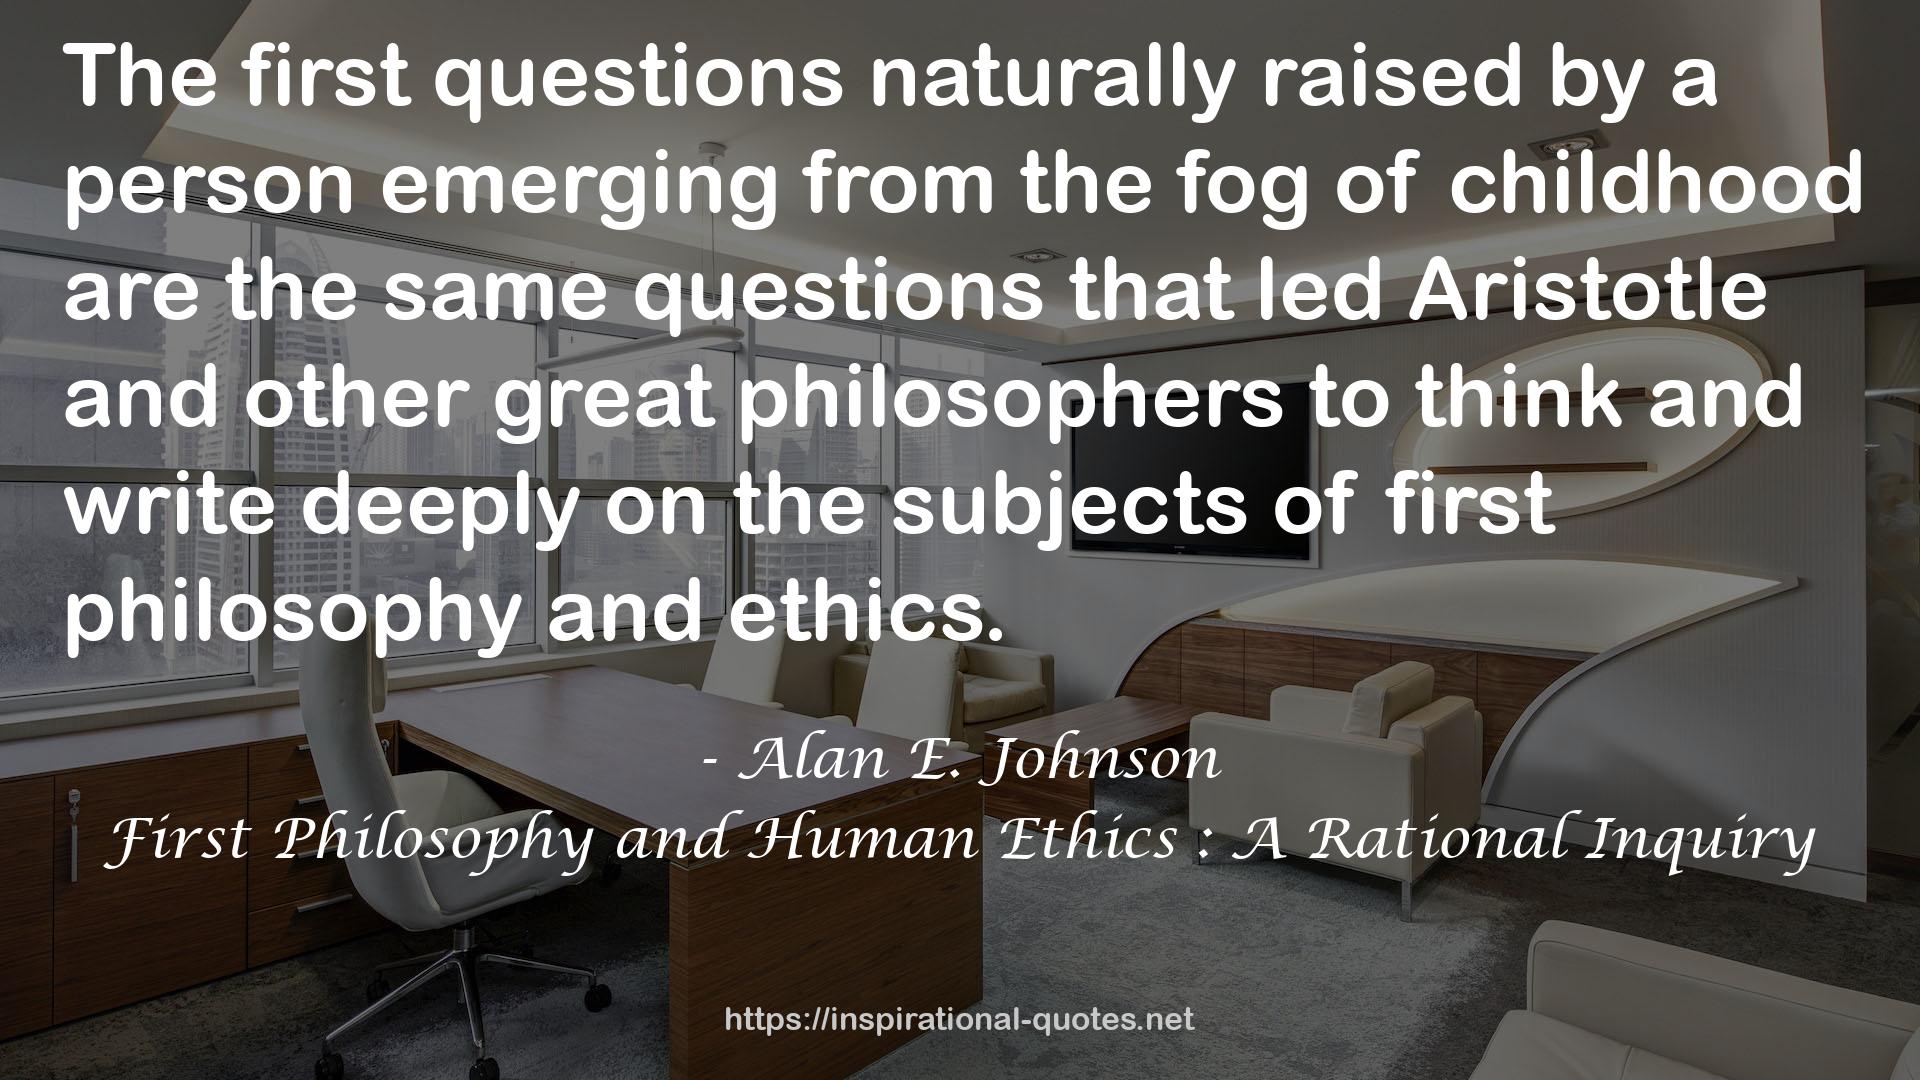 First Philosophy and Human Ethics : A Rational Inquiry QUOTES